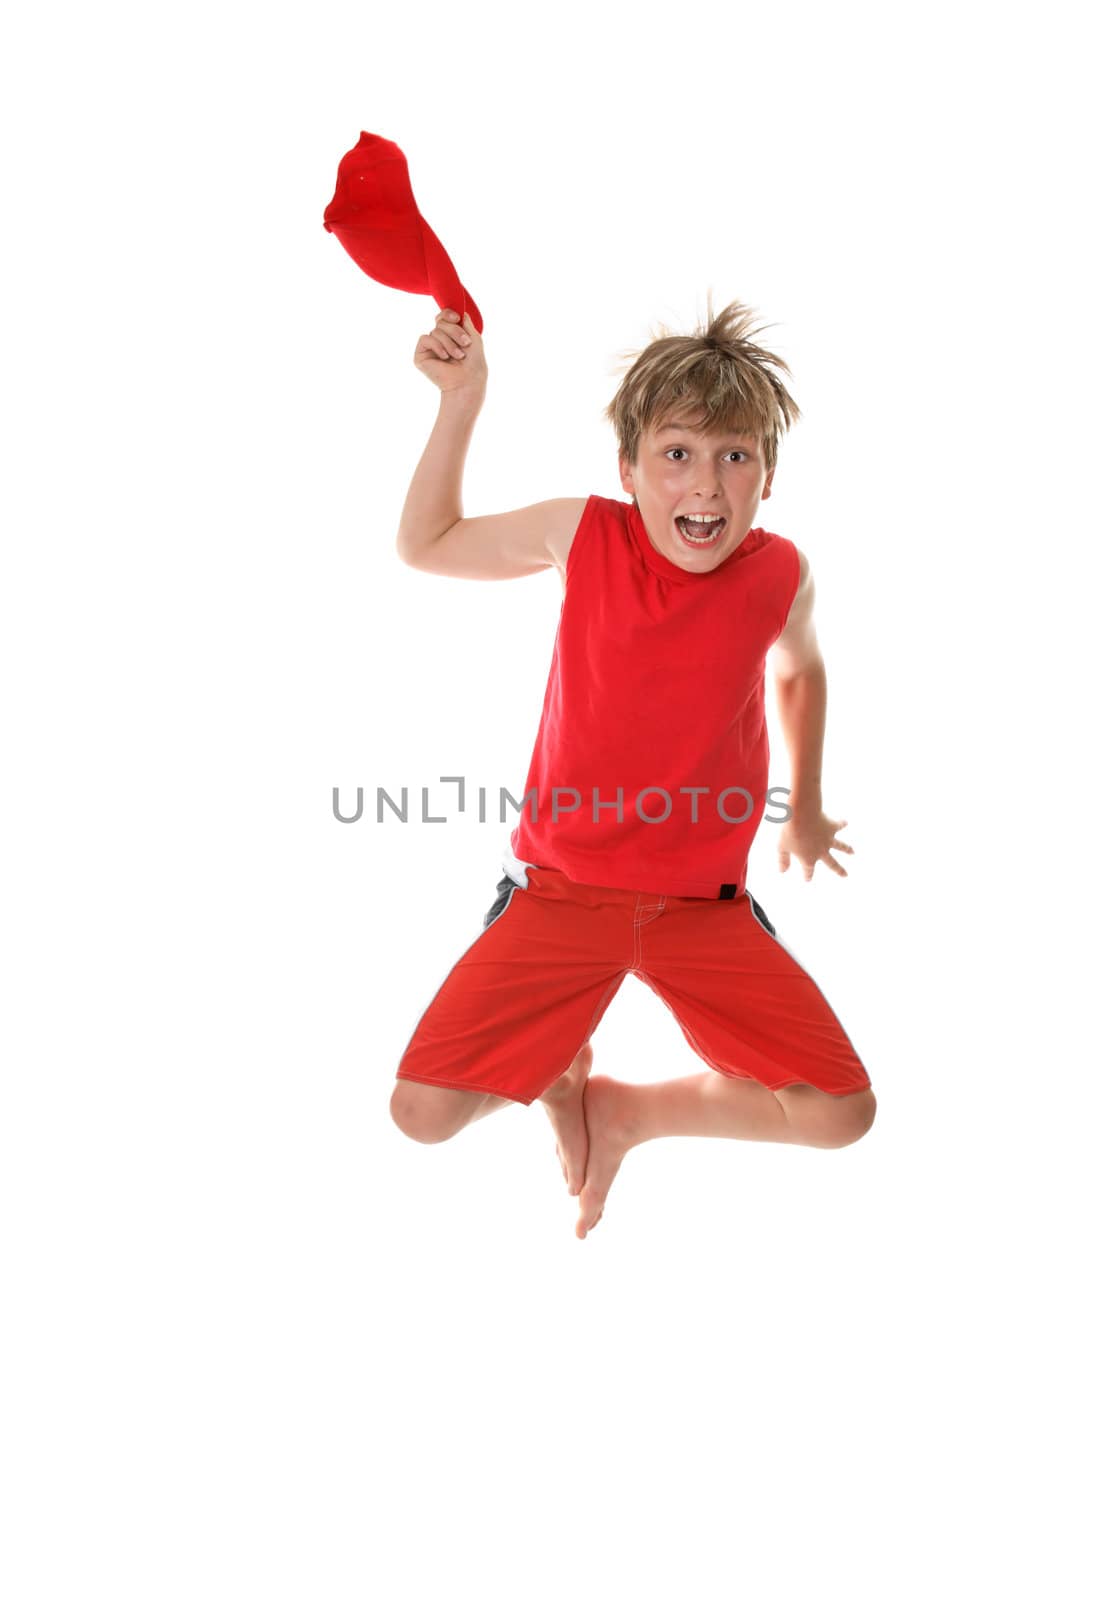 A boy with zestful energy jumps high off the floor and takes off his hat.